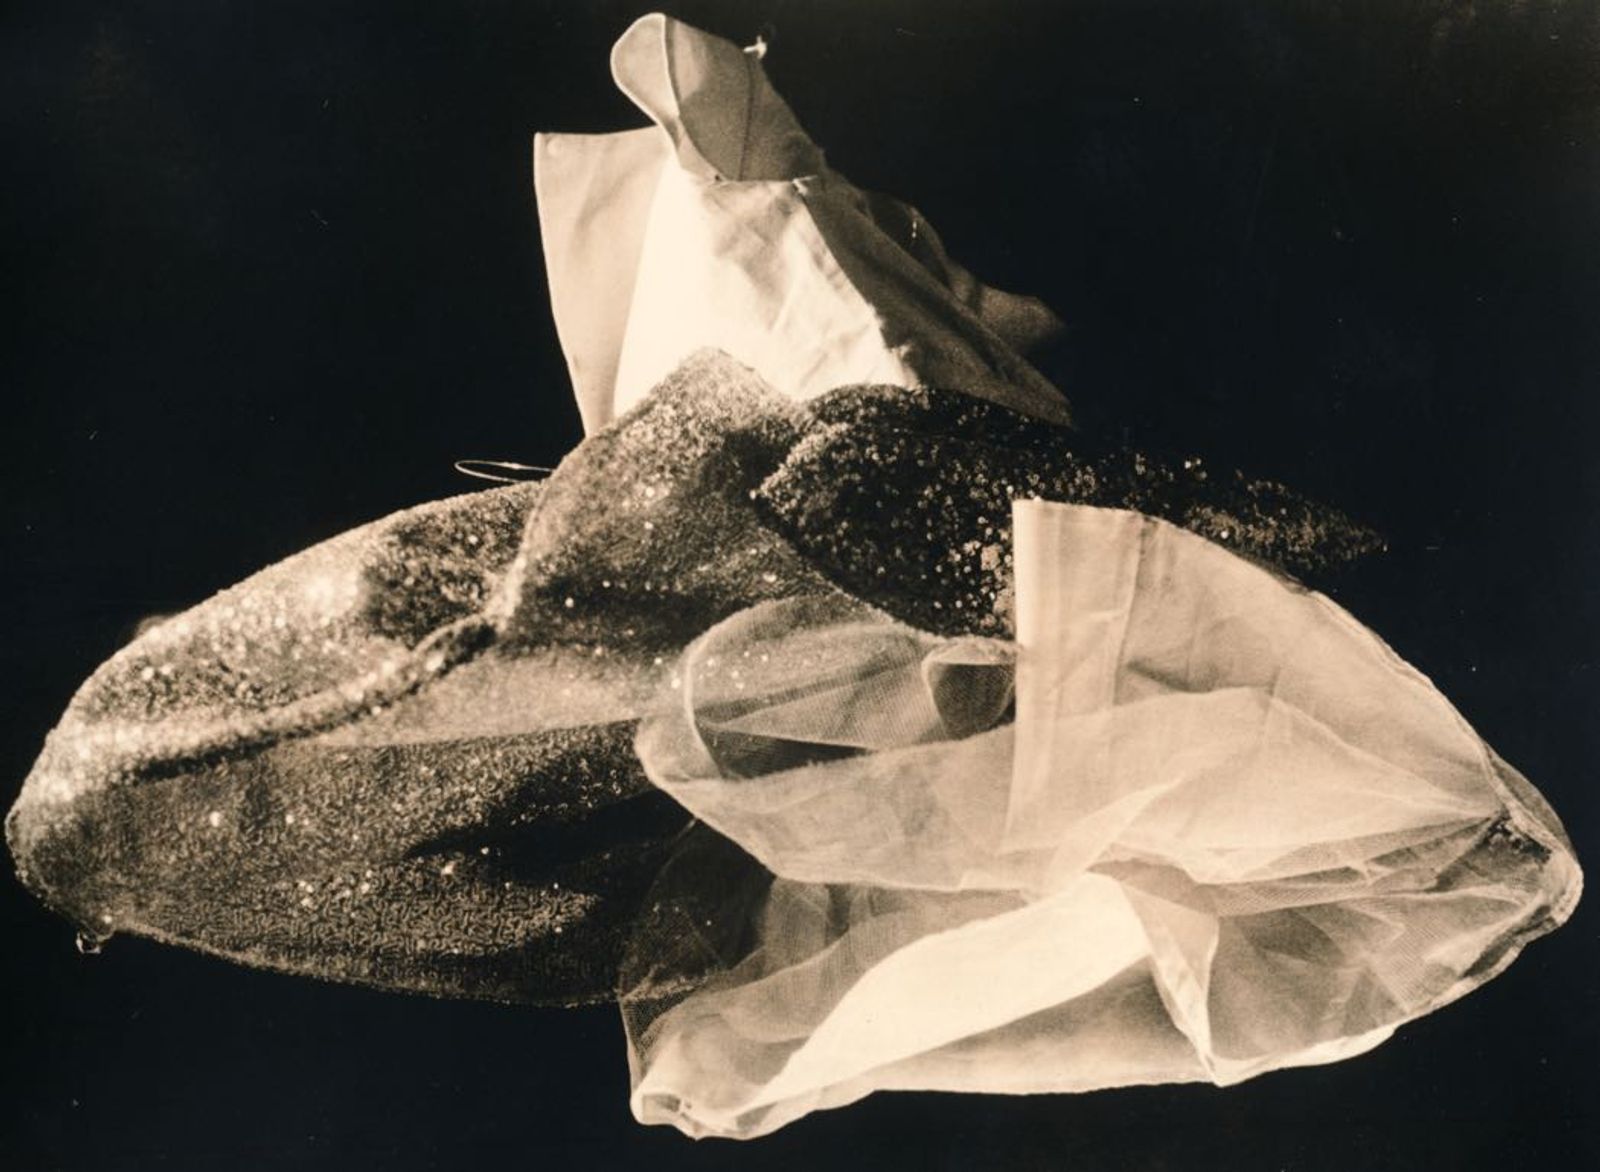 © Jo Stapleton - Child's party dress lit and shot from below (Lith print)